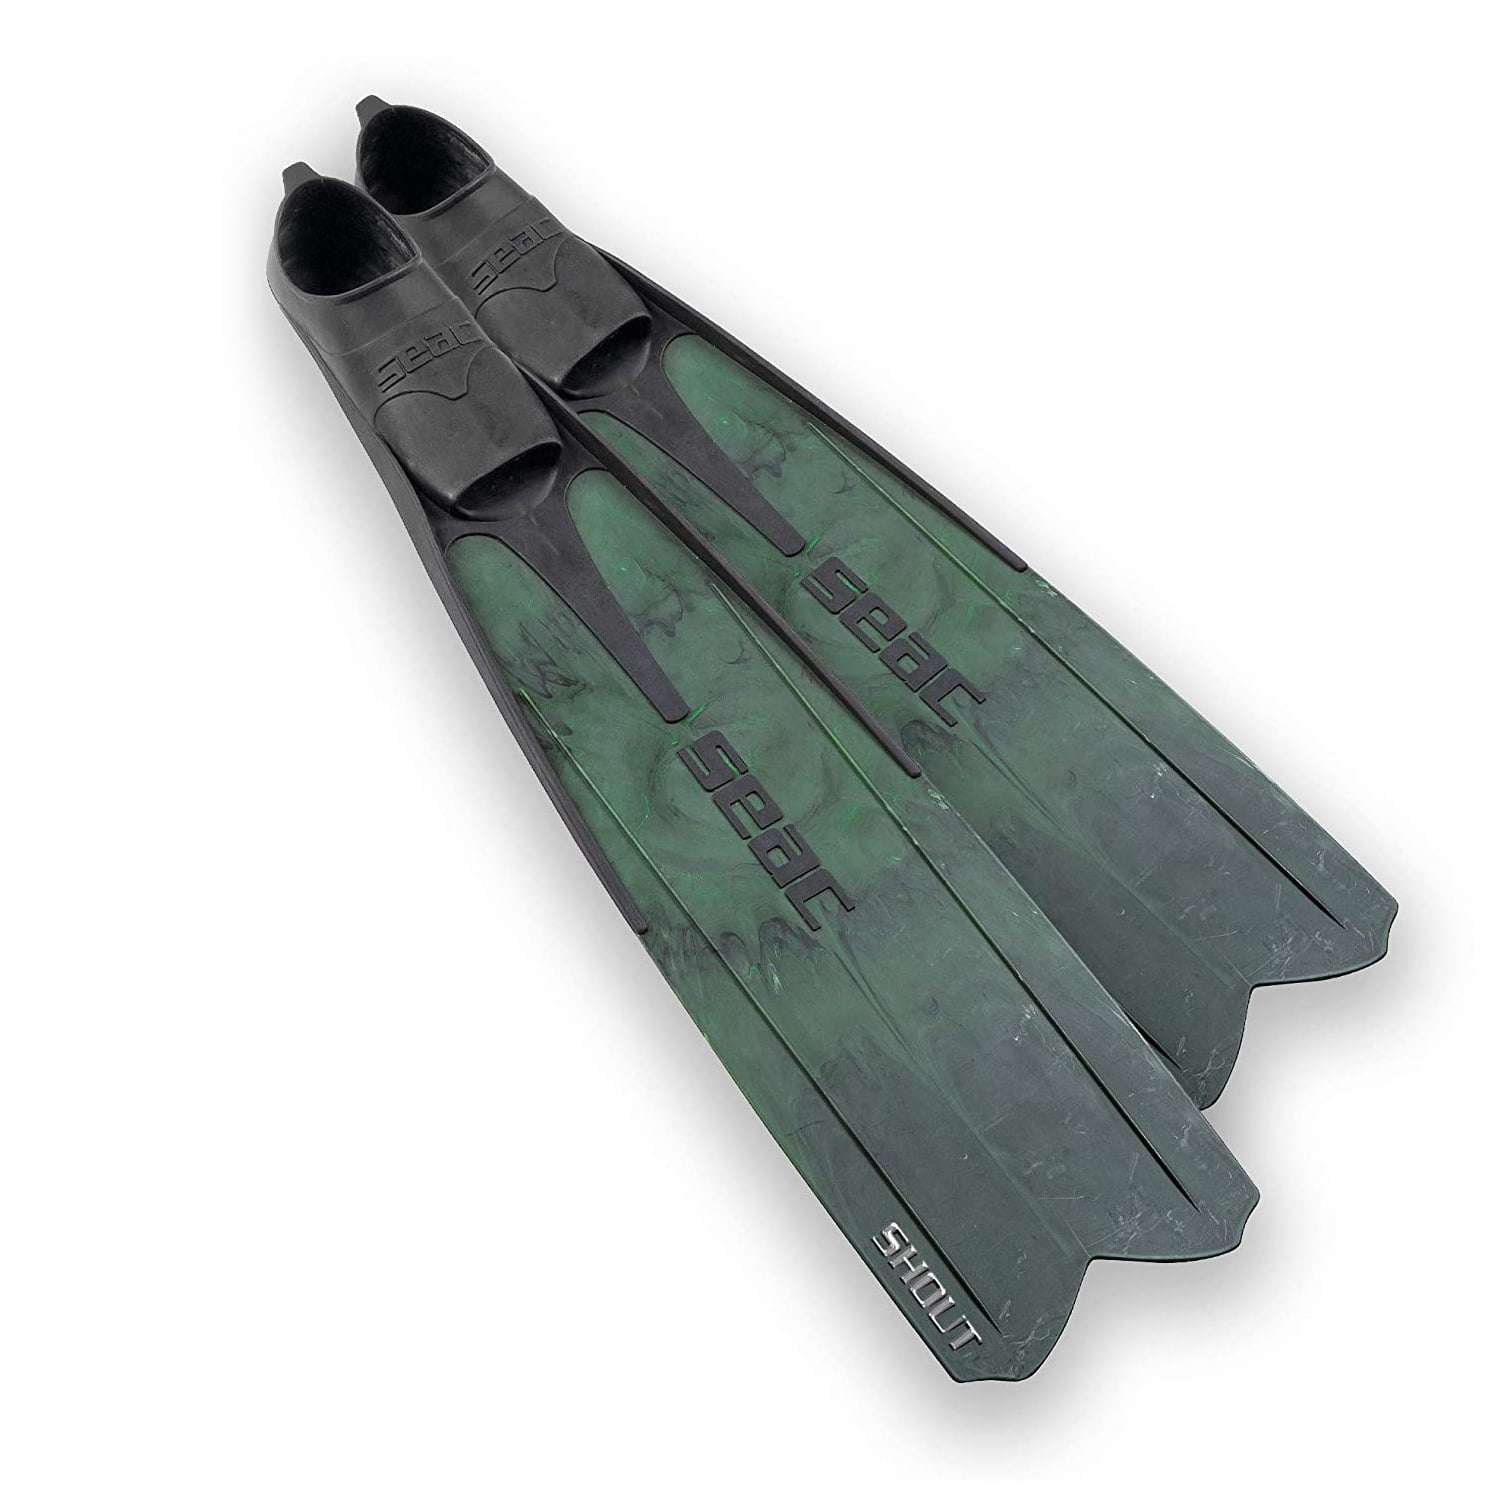 SEAC Shout Long Fins for Freediving and Spearfishing, Size 8 to 8.5, Green  Camo 